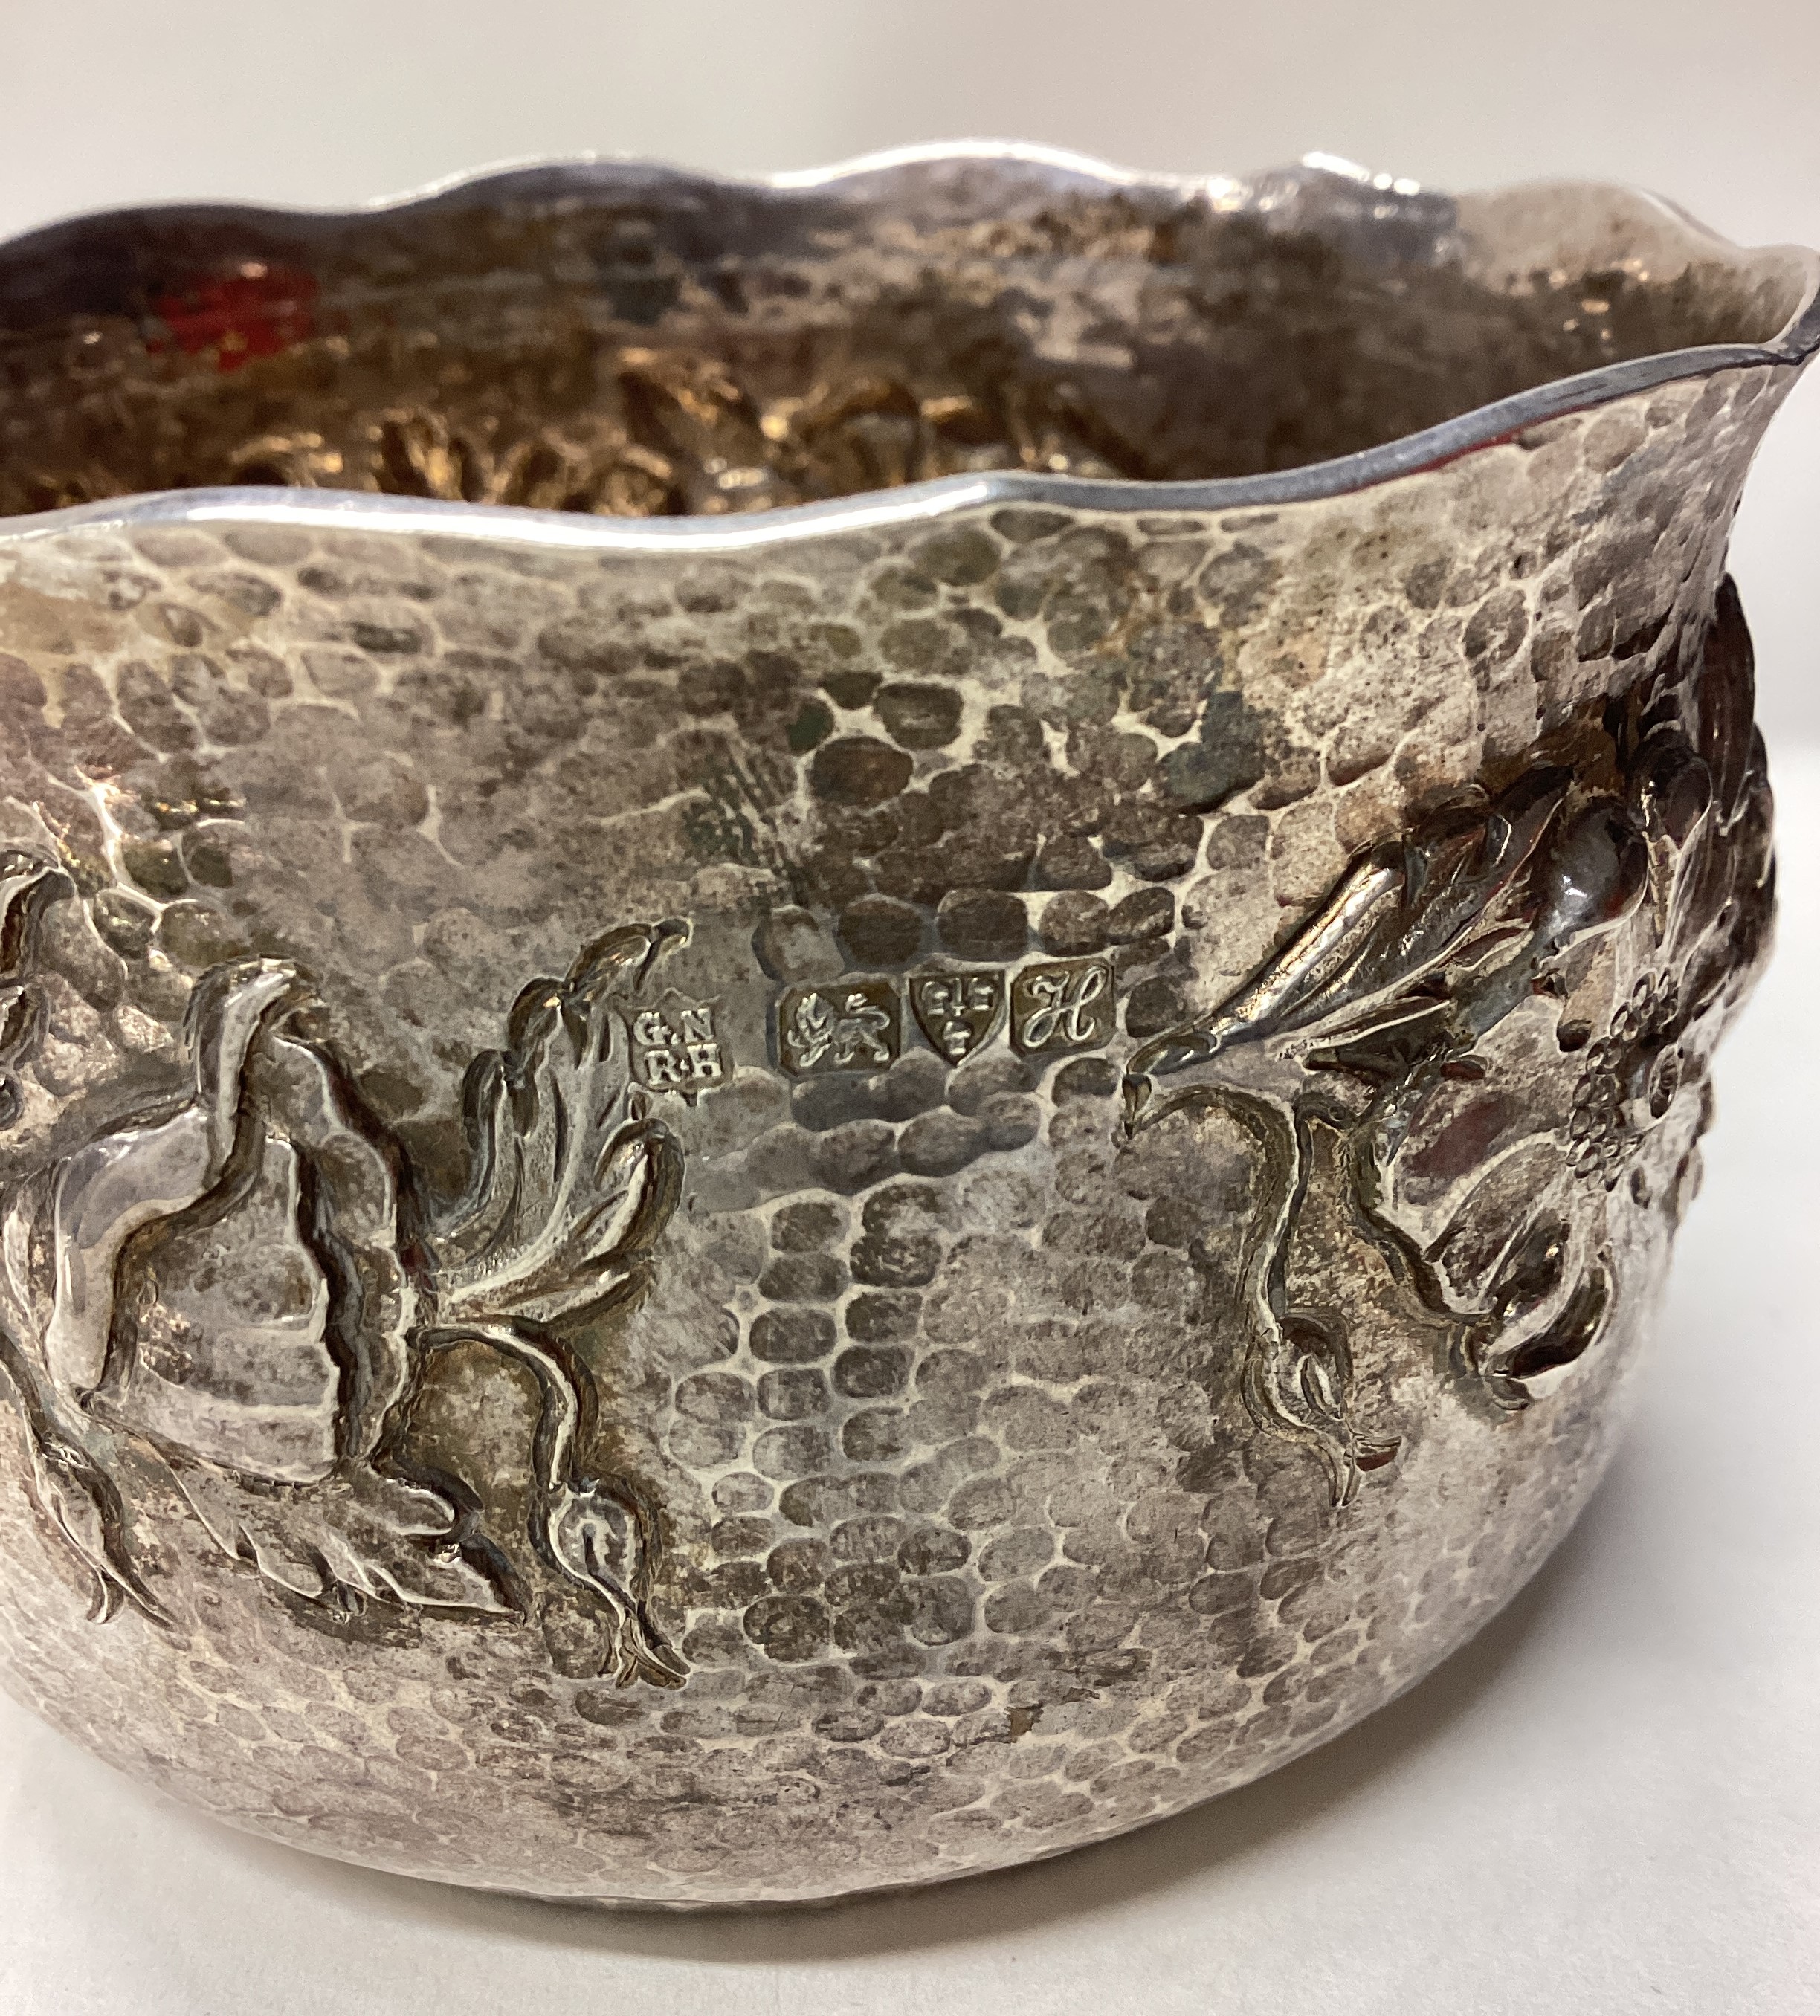 CHESTER: A fine Art Nouveau silver rose bowl with chased decoration. - Image 3 of 3